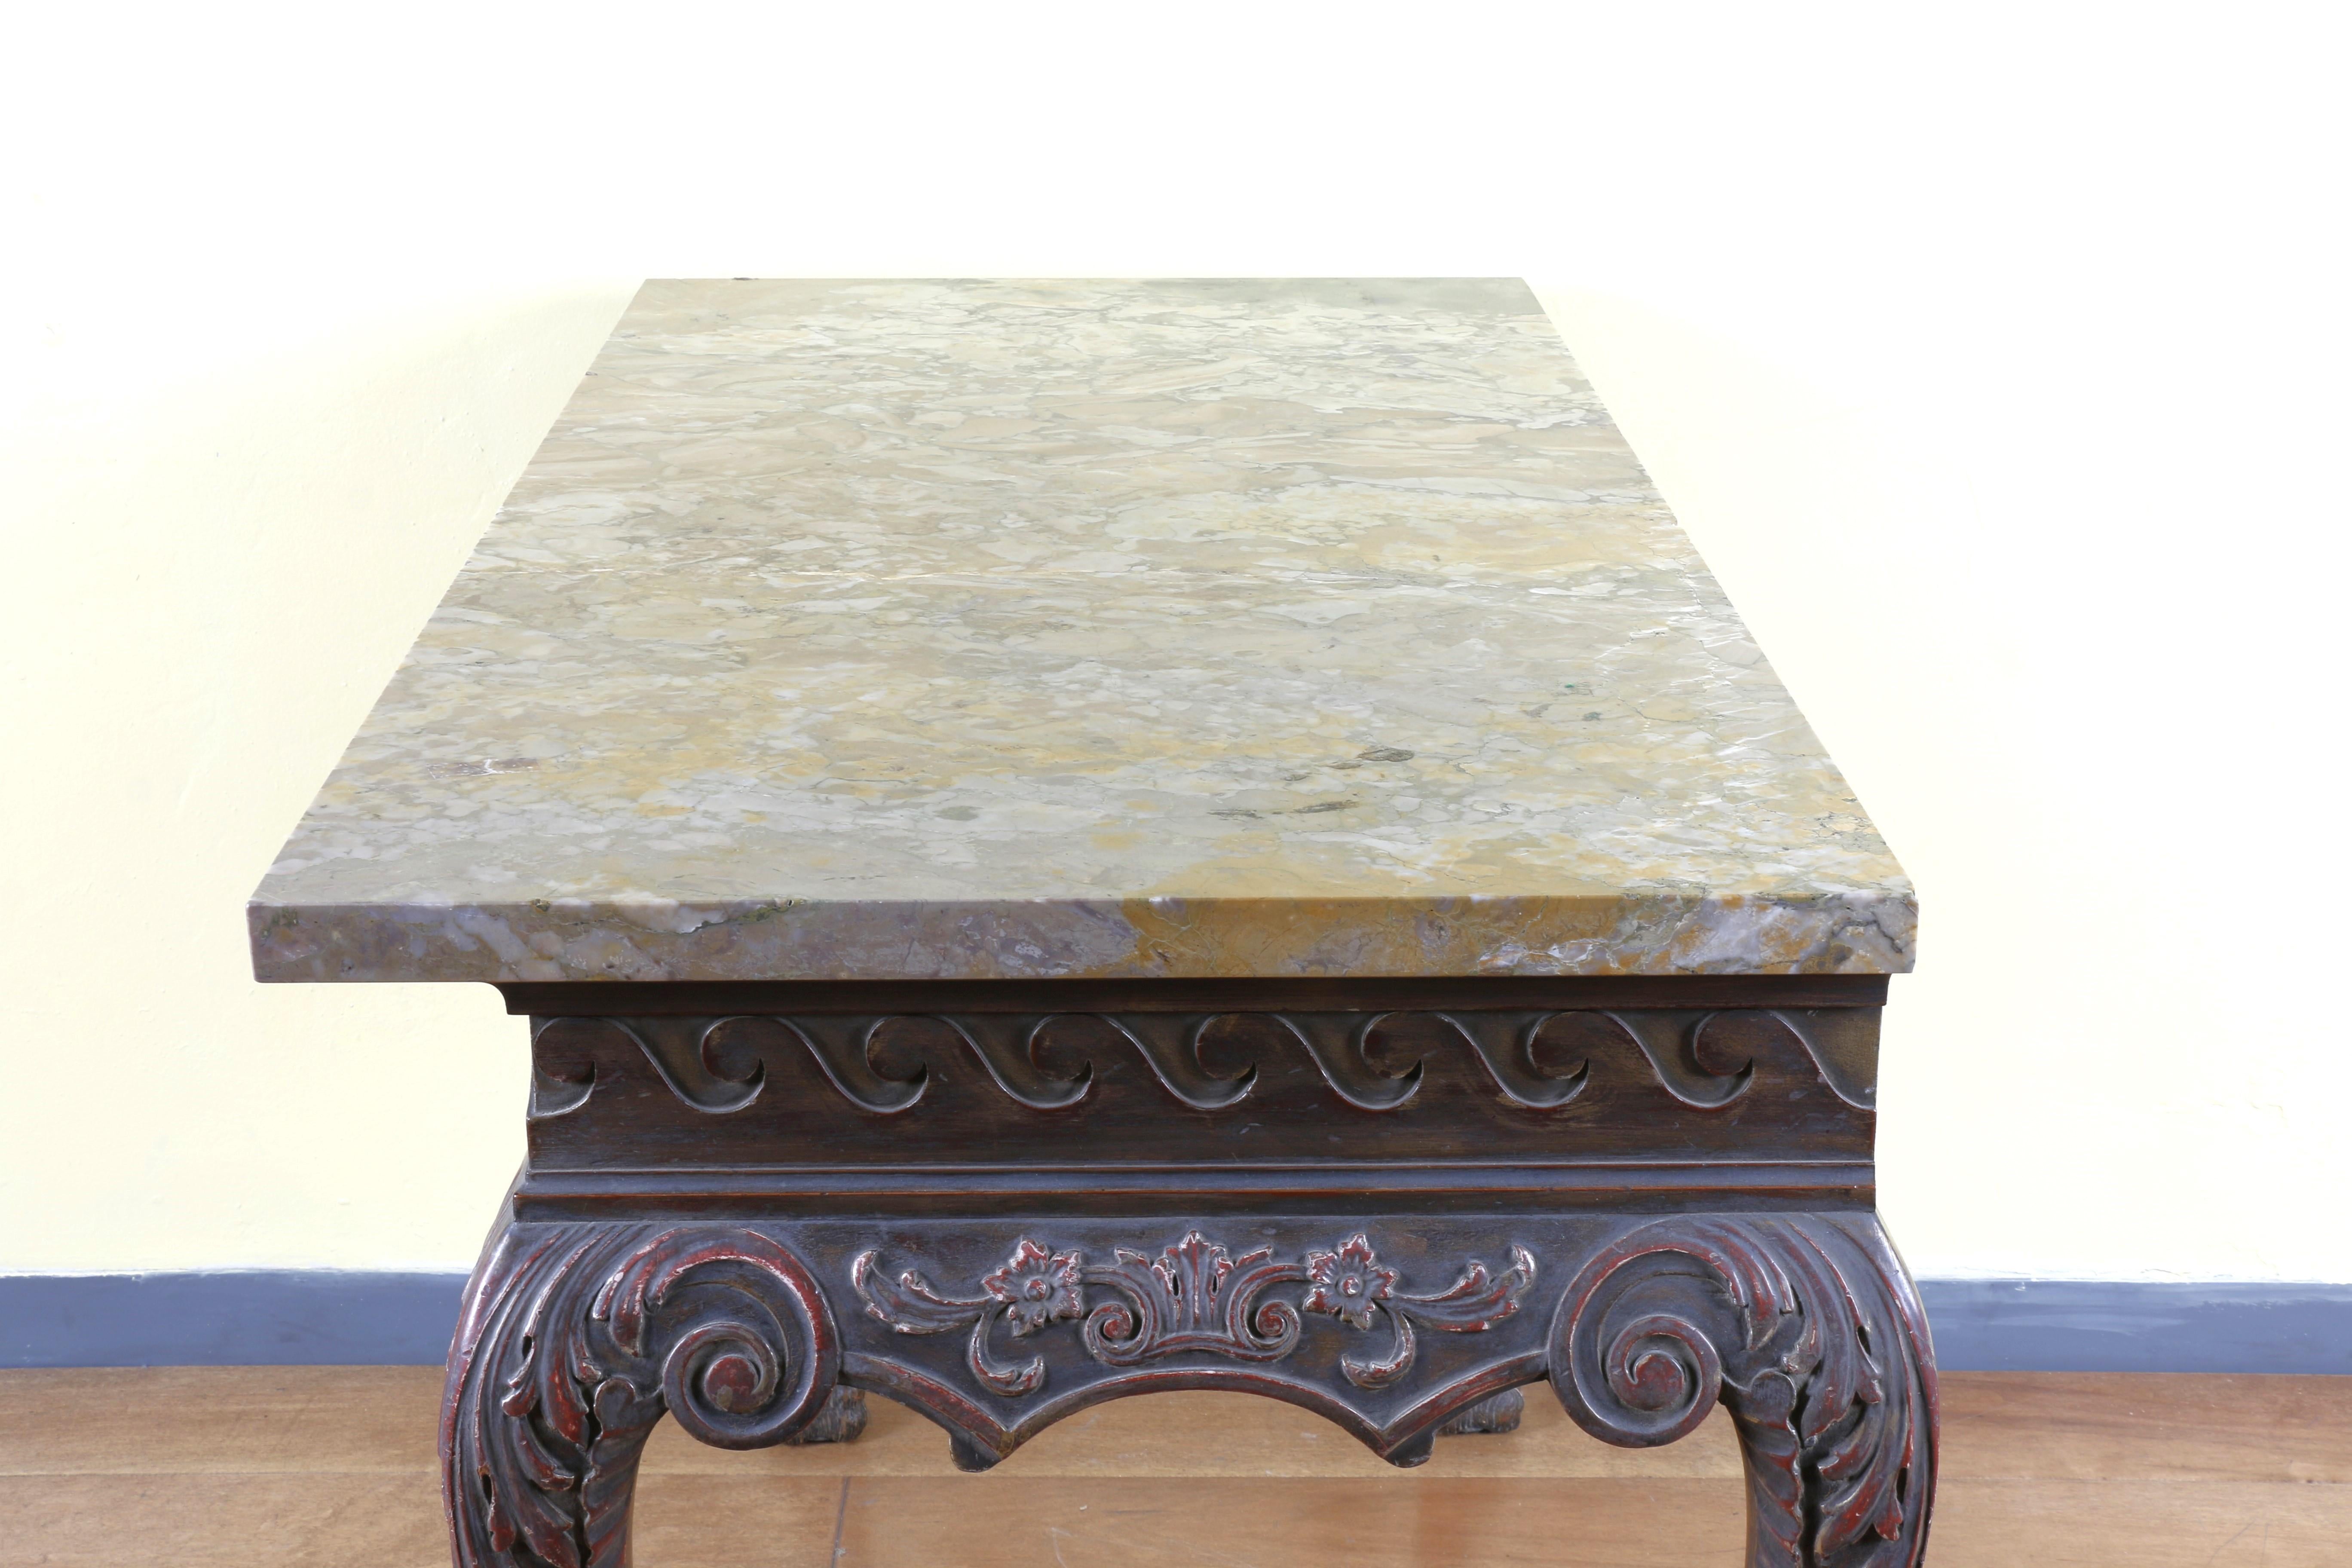 Spectacular 19th century Irish Chippendale style mahogany accent console table with beautiful carving. Made of mahogany wood and with a marble top. Super heavy and sturdy. A little chip in the marble